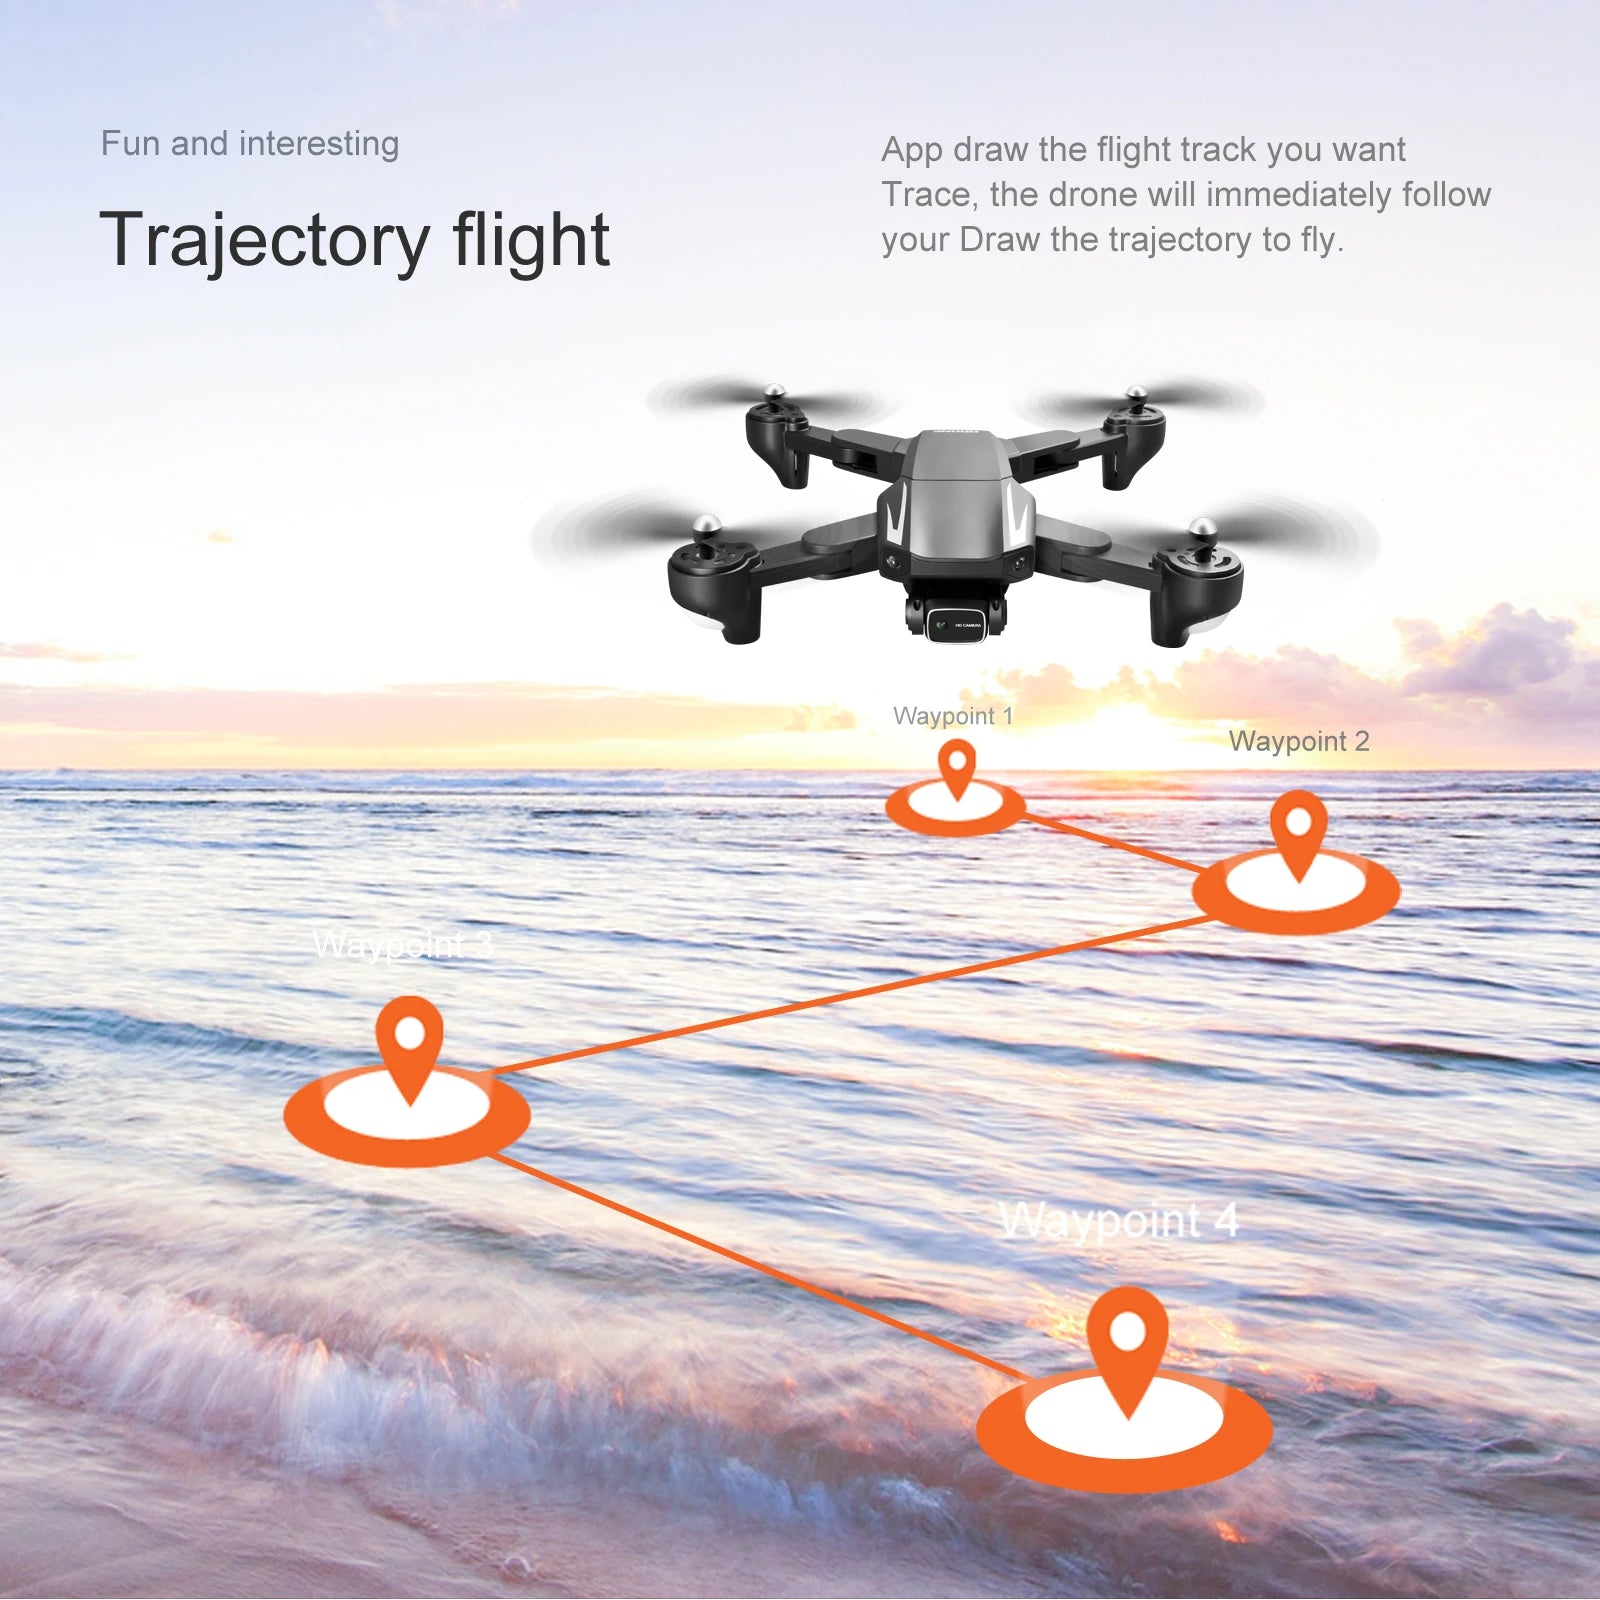 S93 Drone, fun and interesting draw the flight track you want trace, the drone will